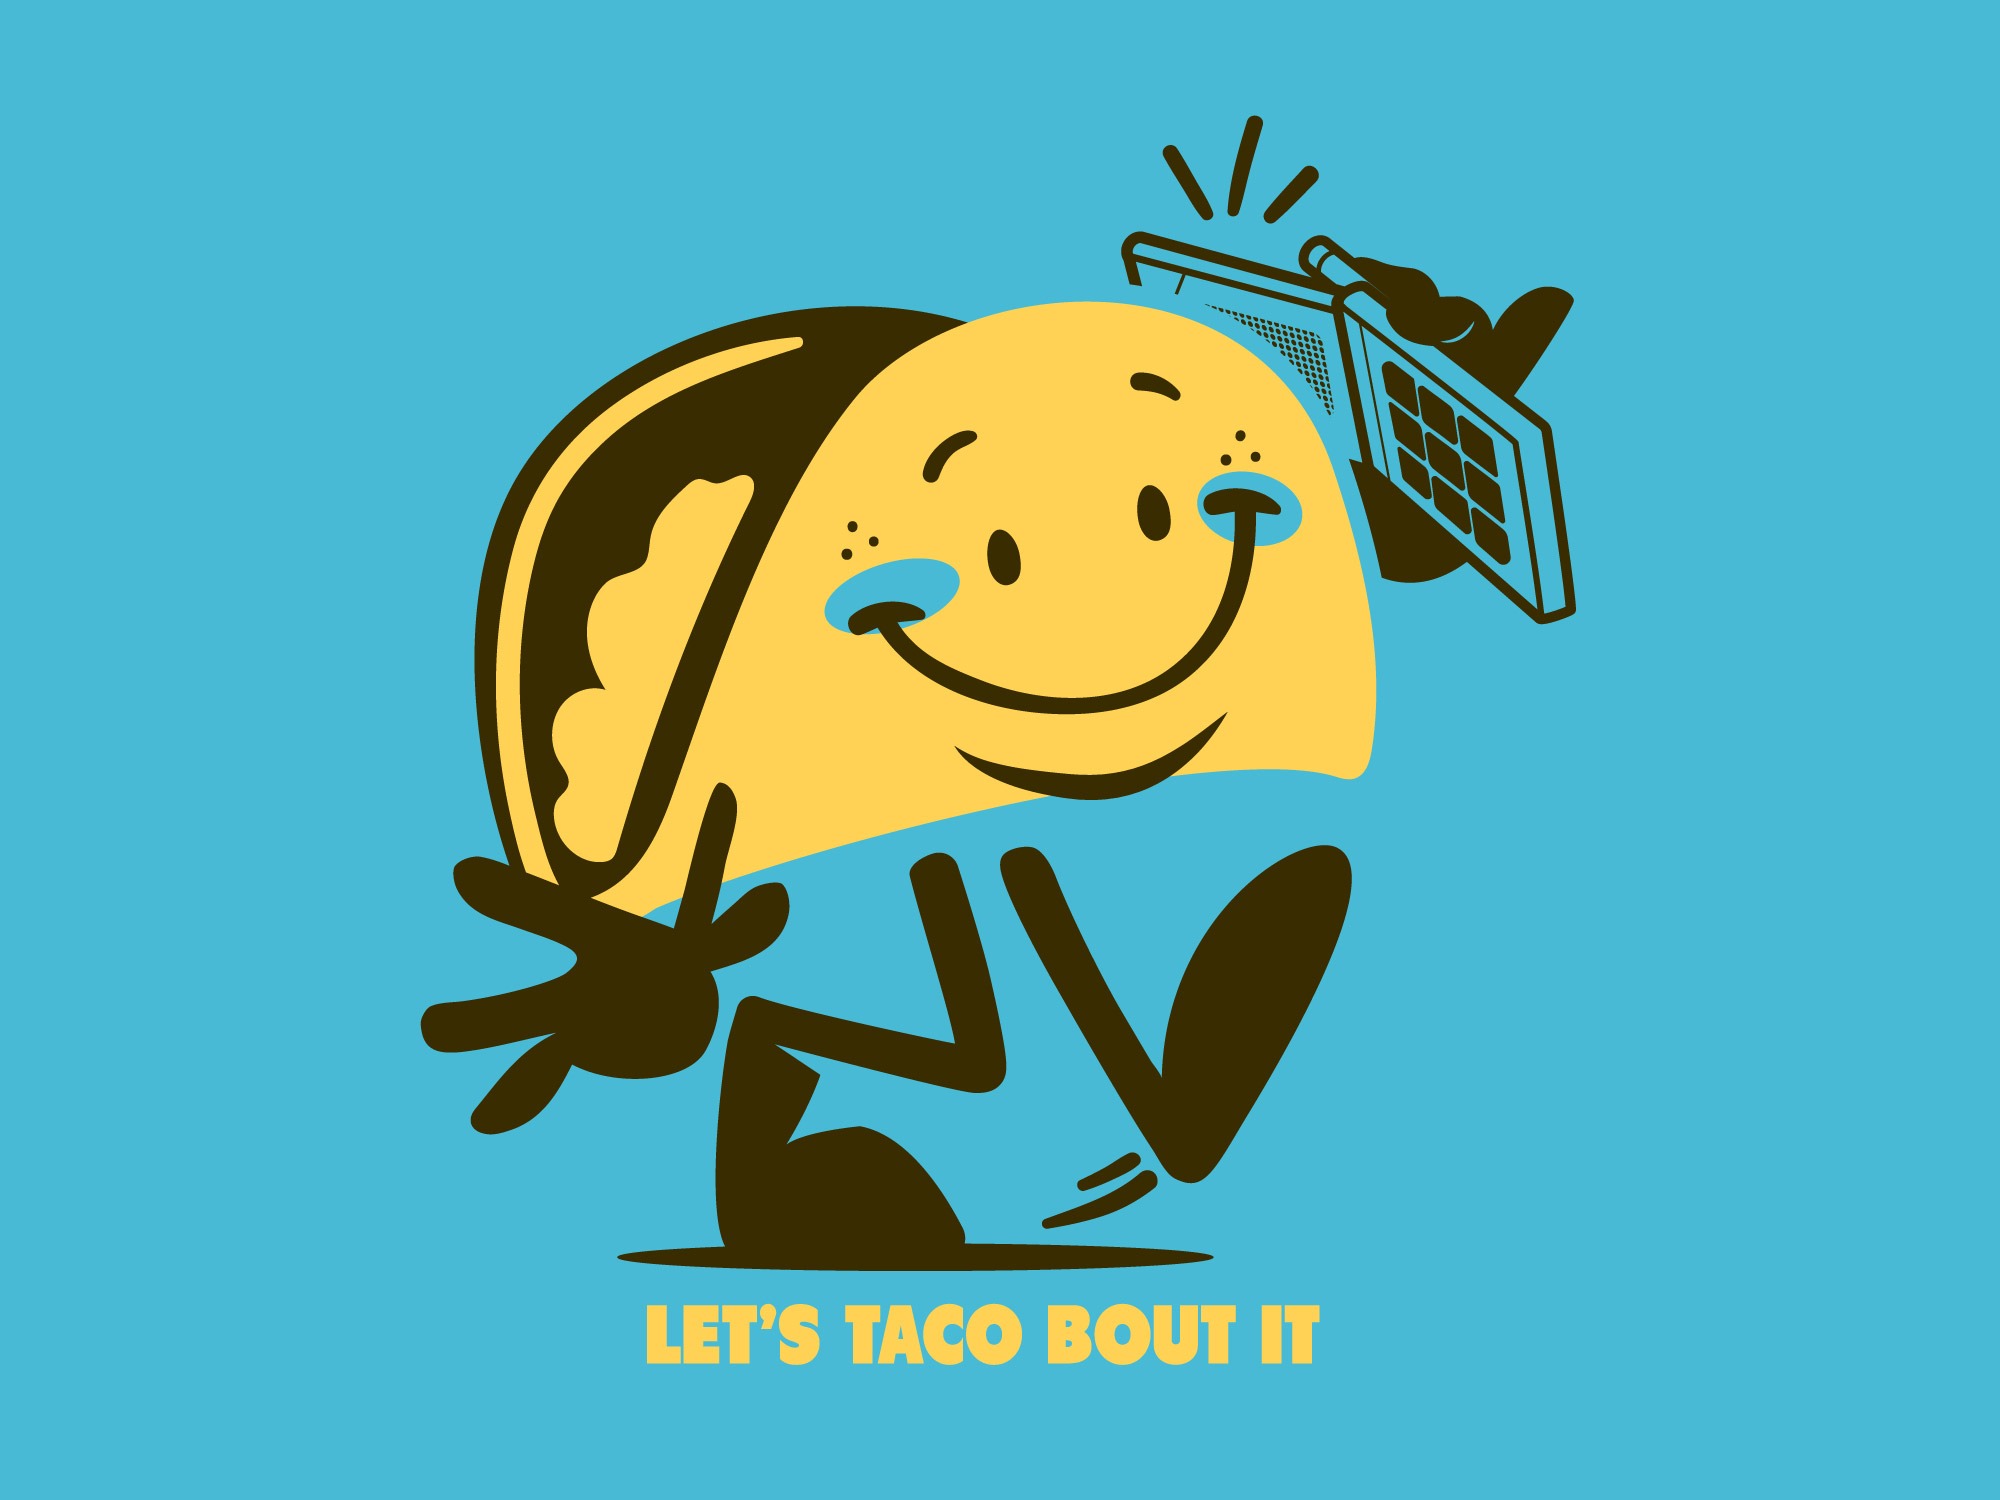 Lets taco about it